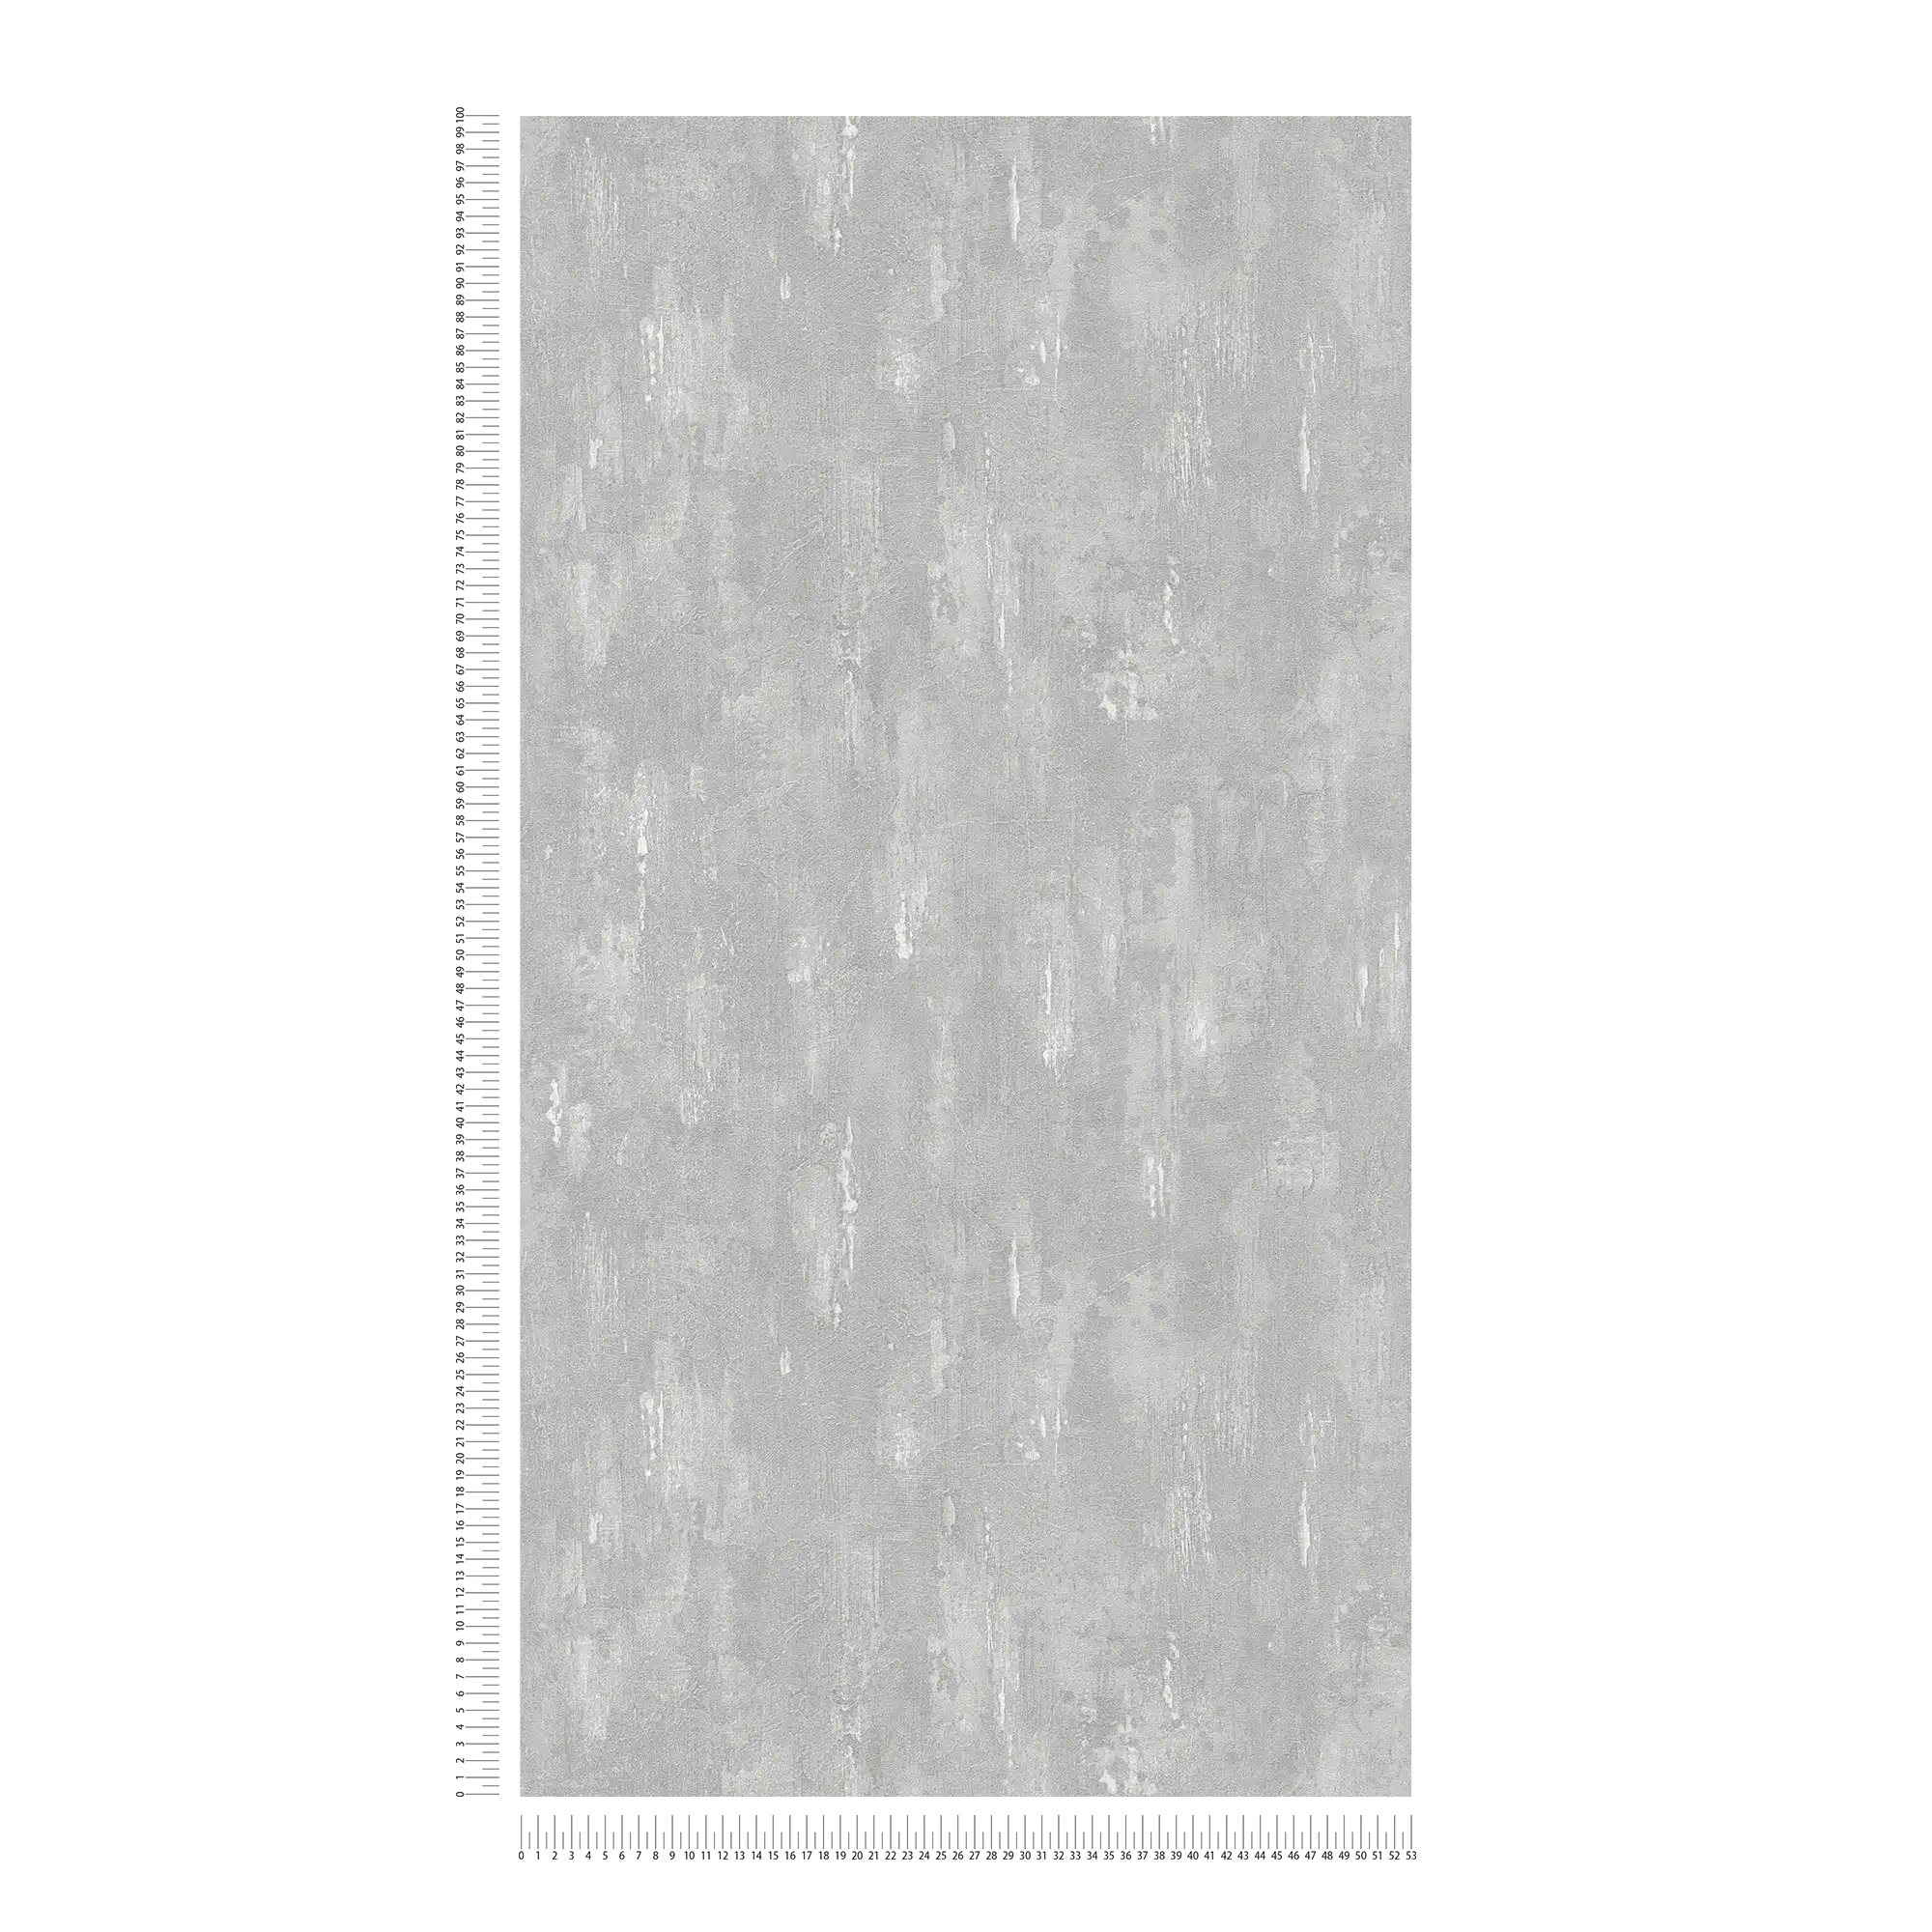             Wallpaper with plaster texture, concrete look and gradient - grey
        